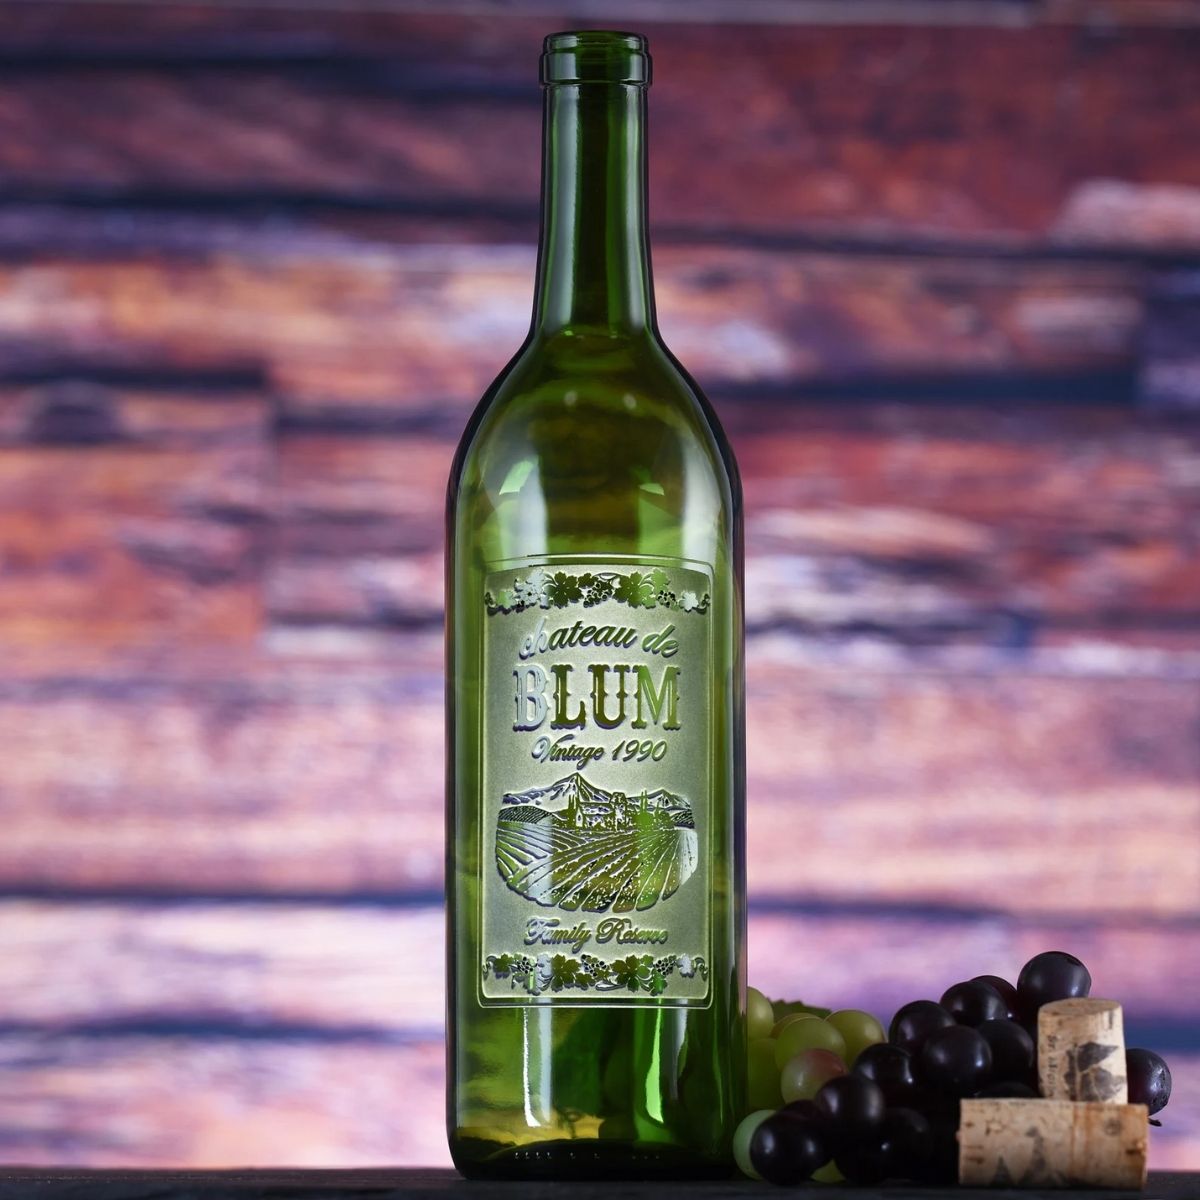 The Best Gifts for Wine Lovers Option: Engraved Wine Bottles